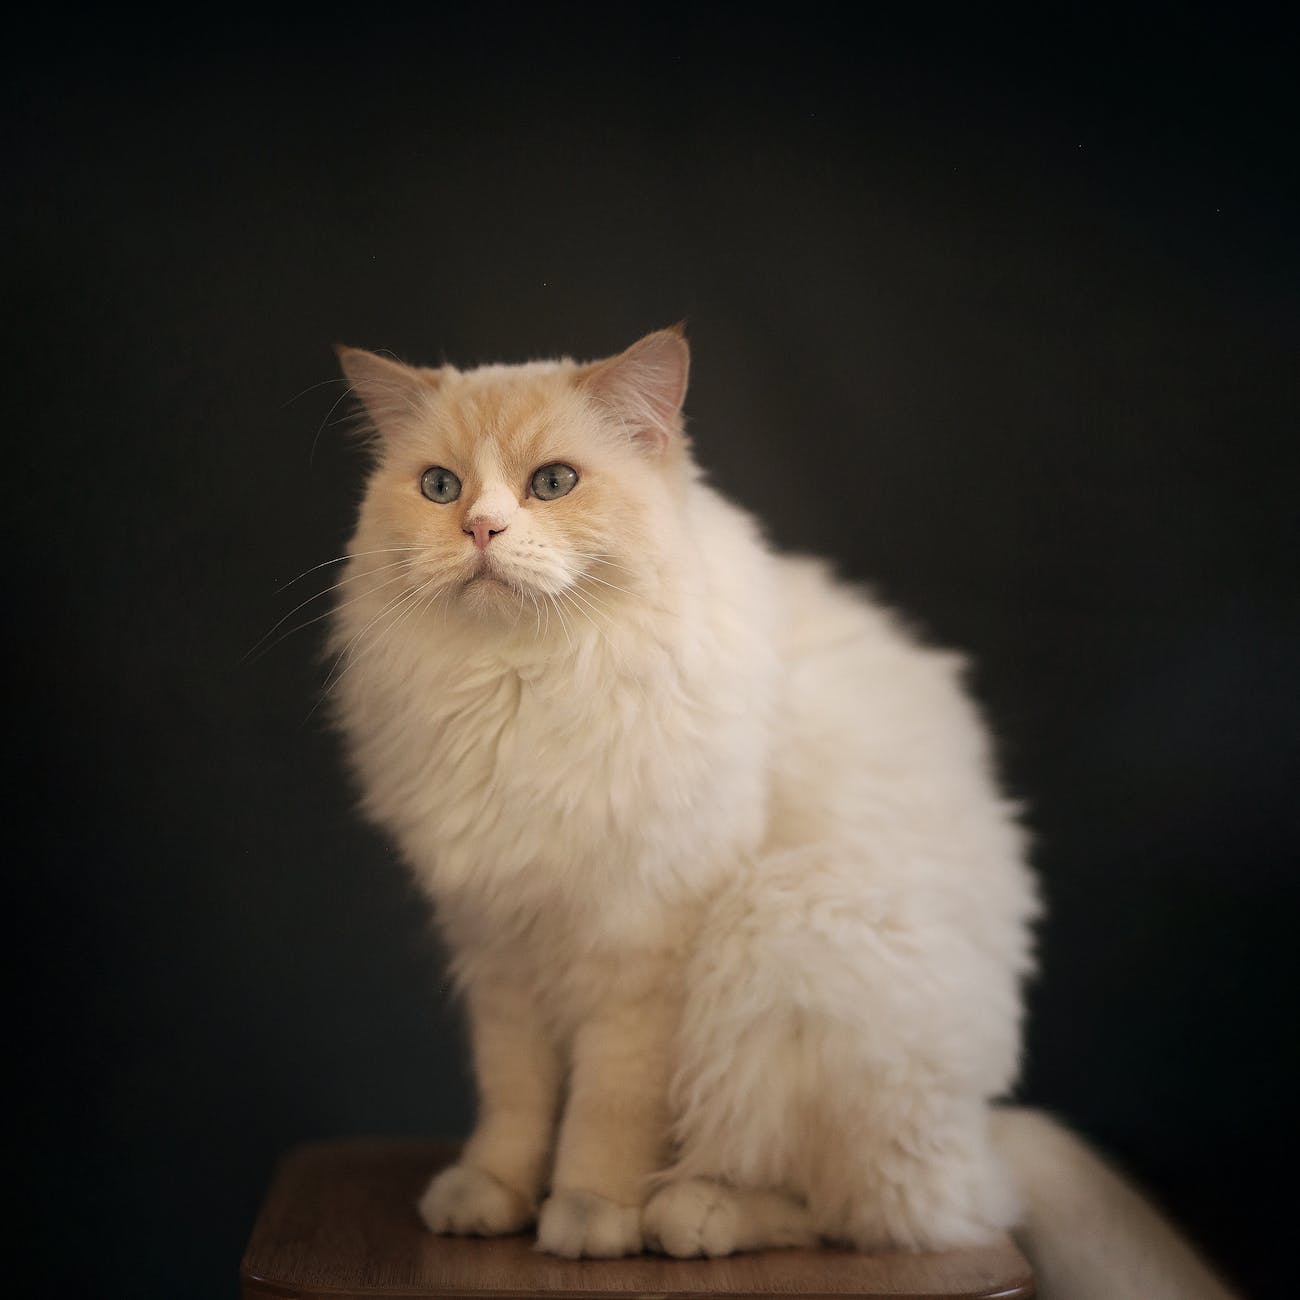 ragdoll cat on brown wooden chair